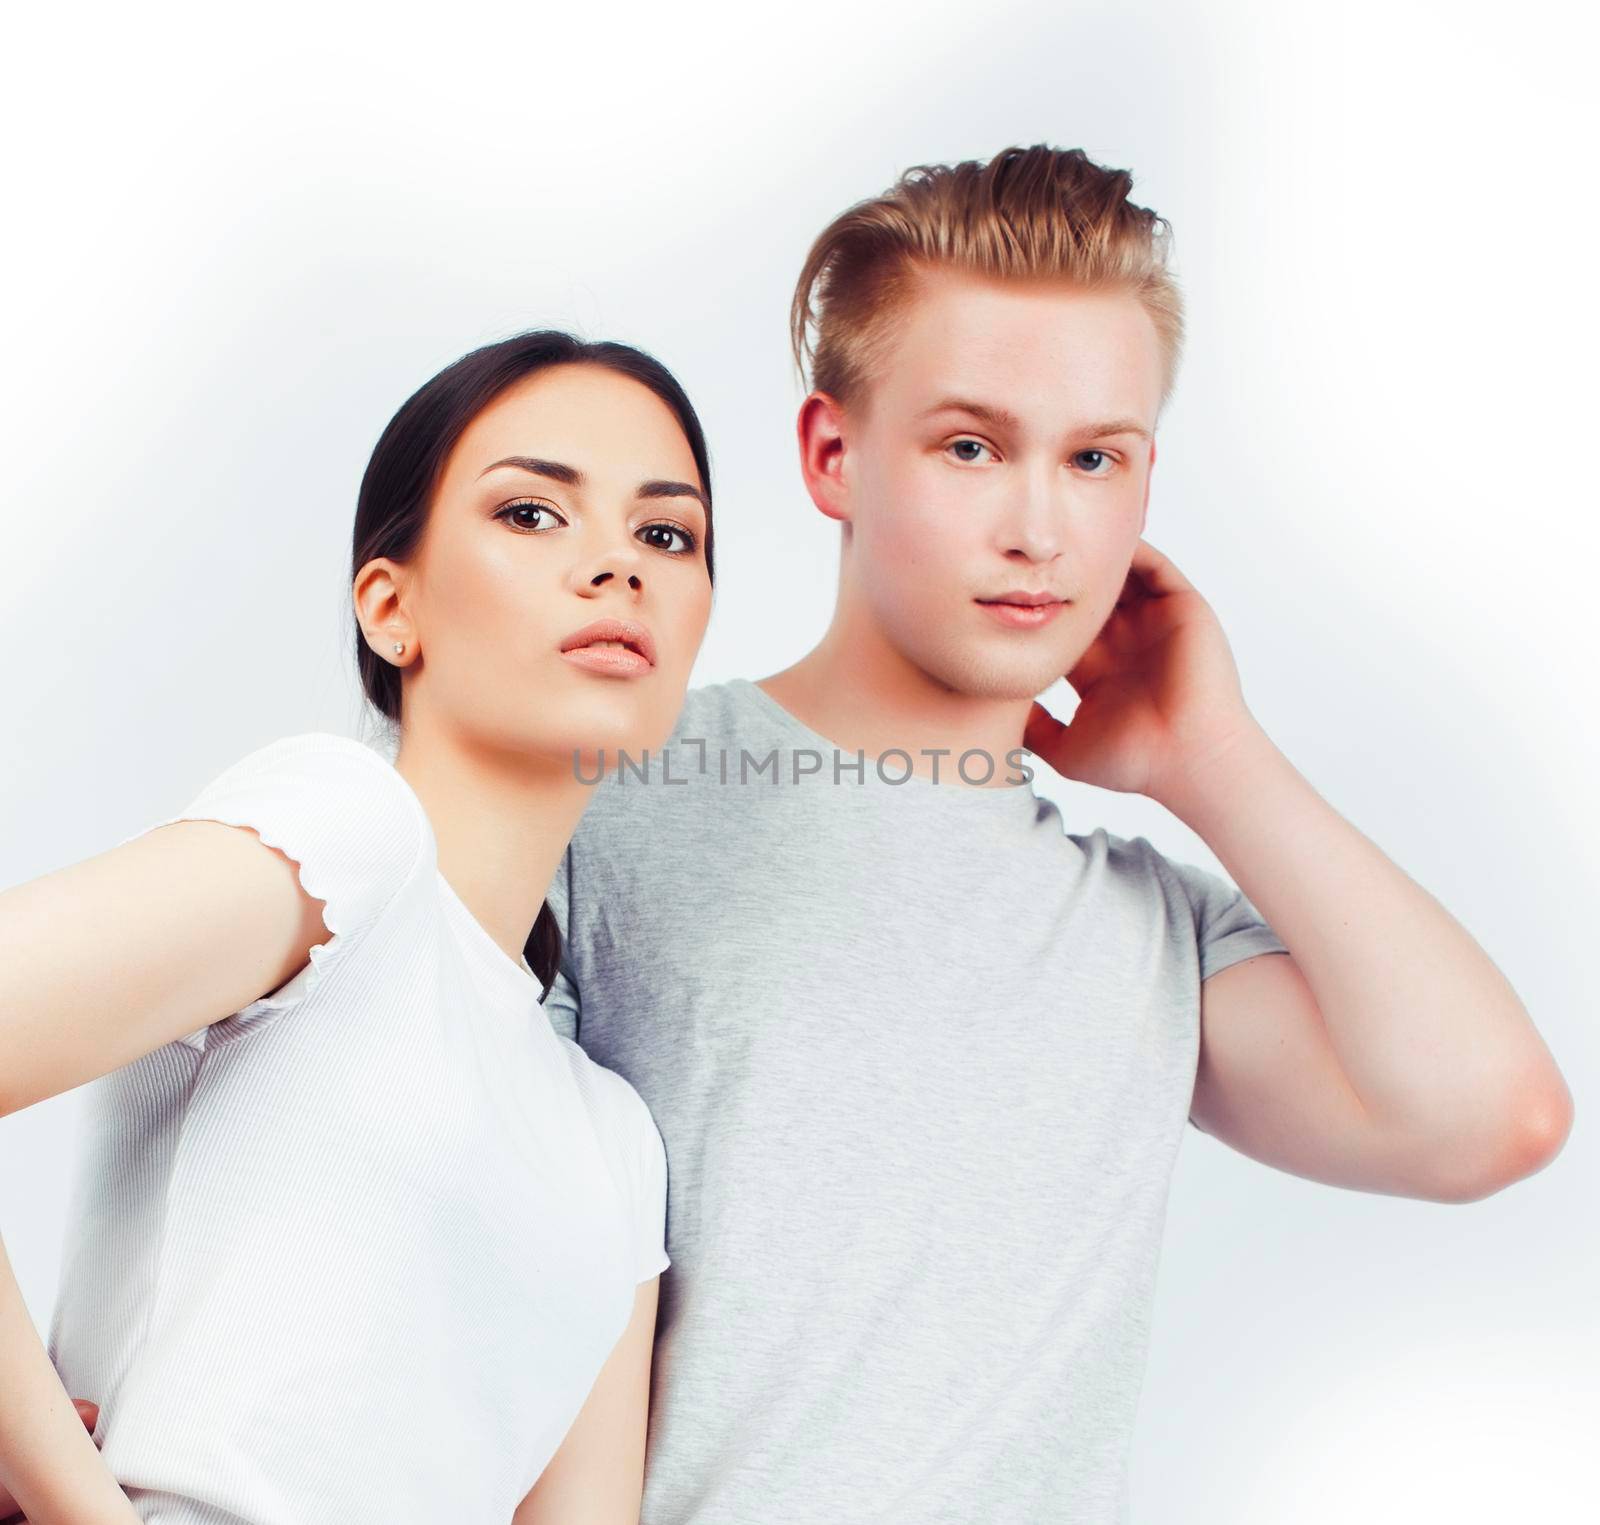 modern hipster guys together couple diverse nations, asian girl and caucasian blond boy isolated on white background, lifestyle people concept close up